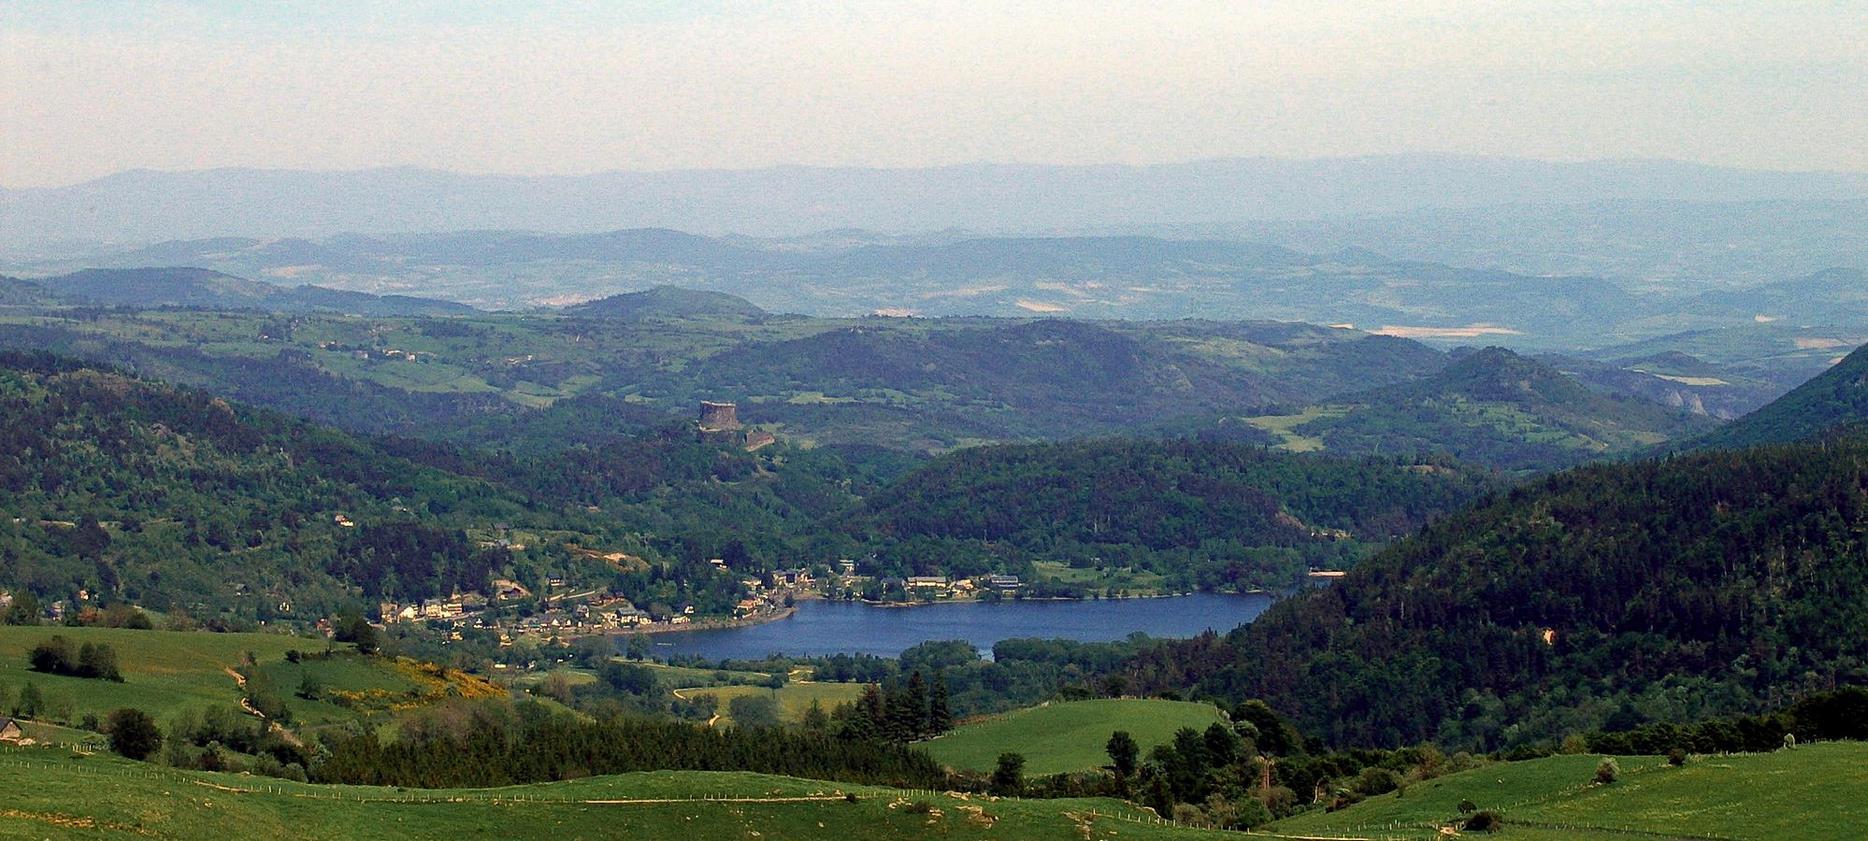 Super Besse - Lake Chambon seen from the Sancy volcanoes